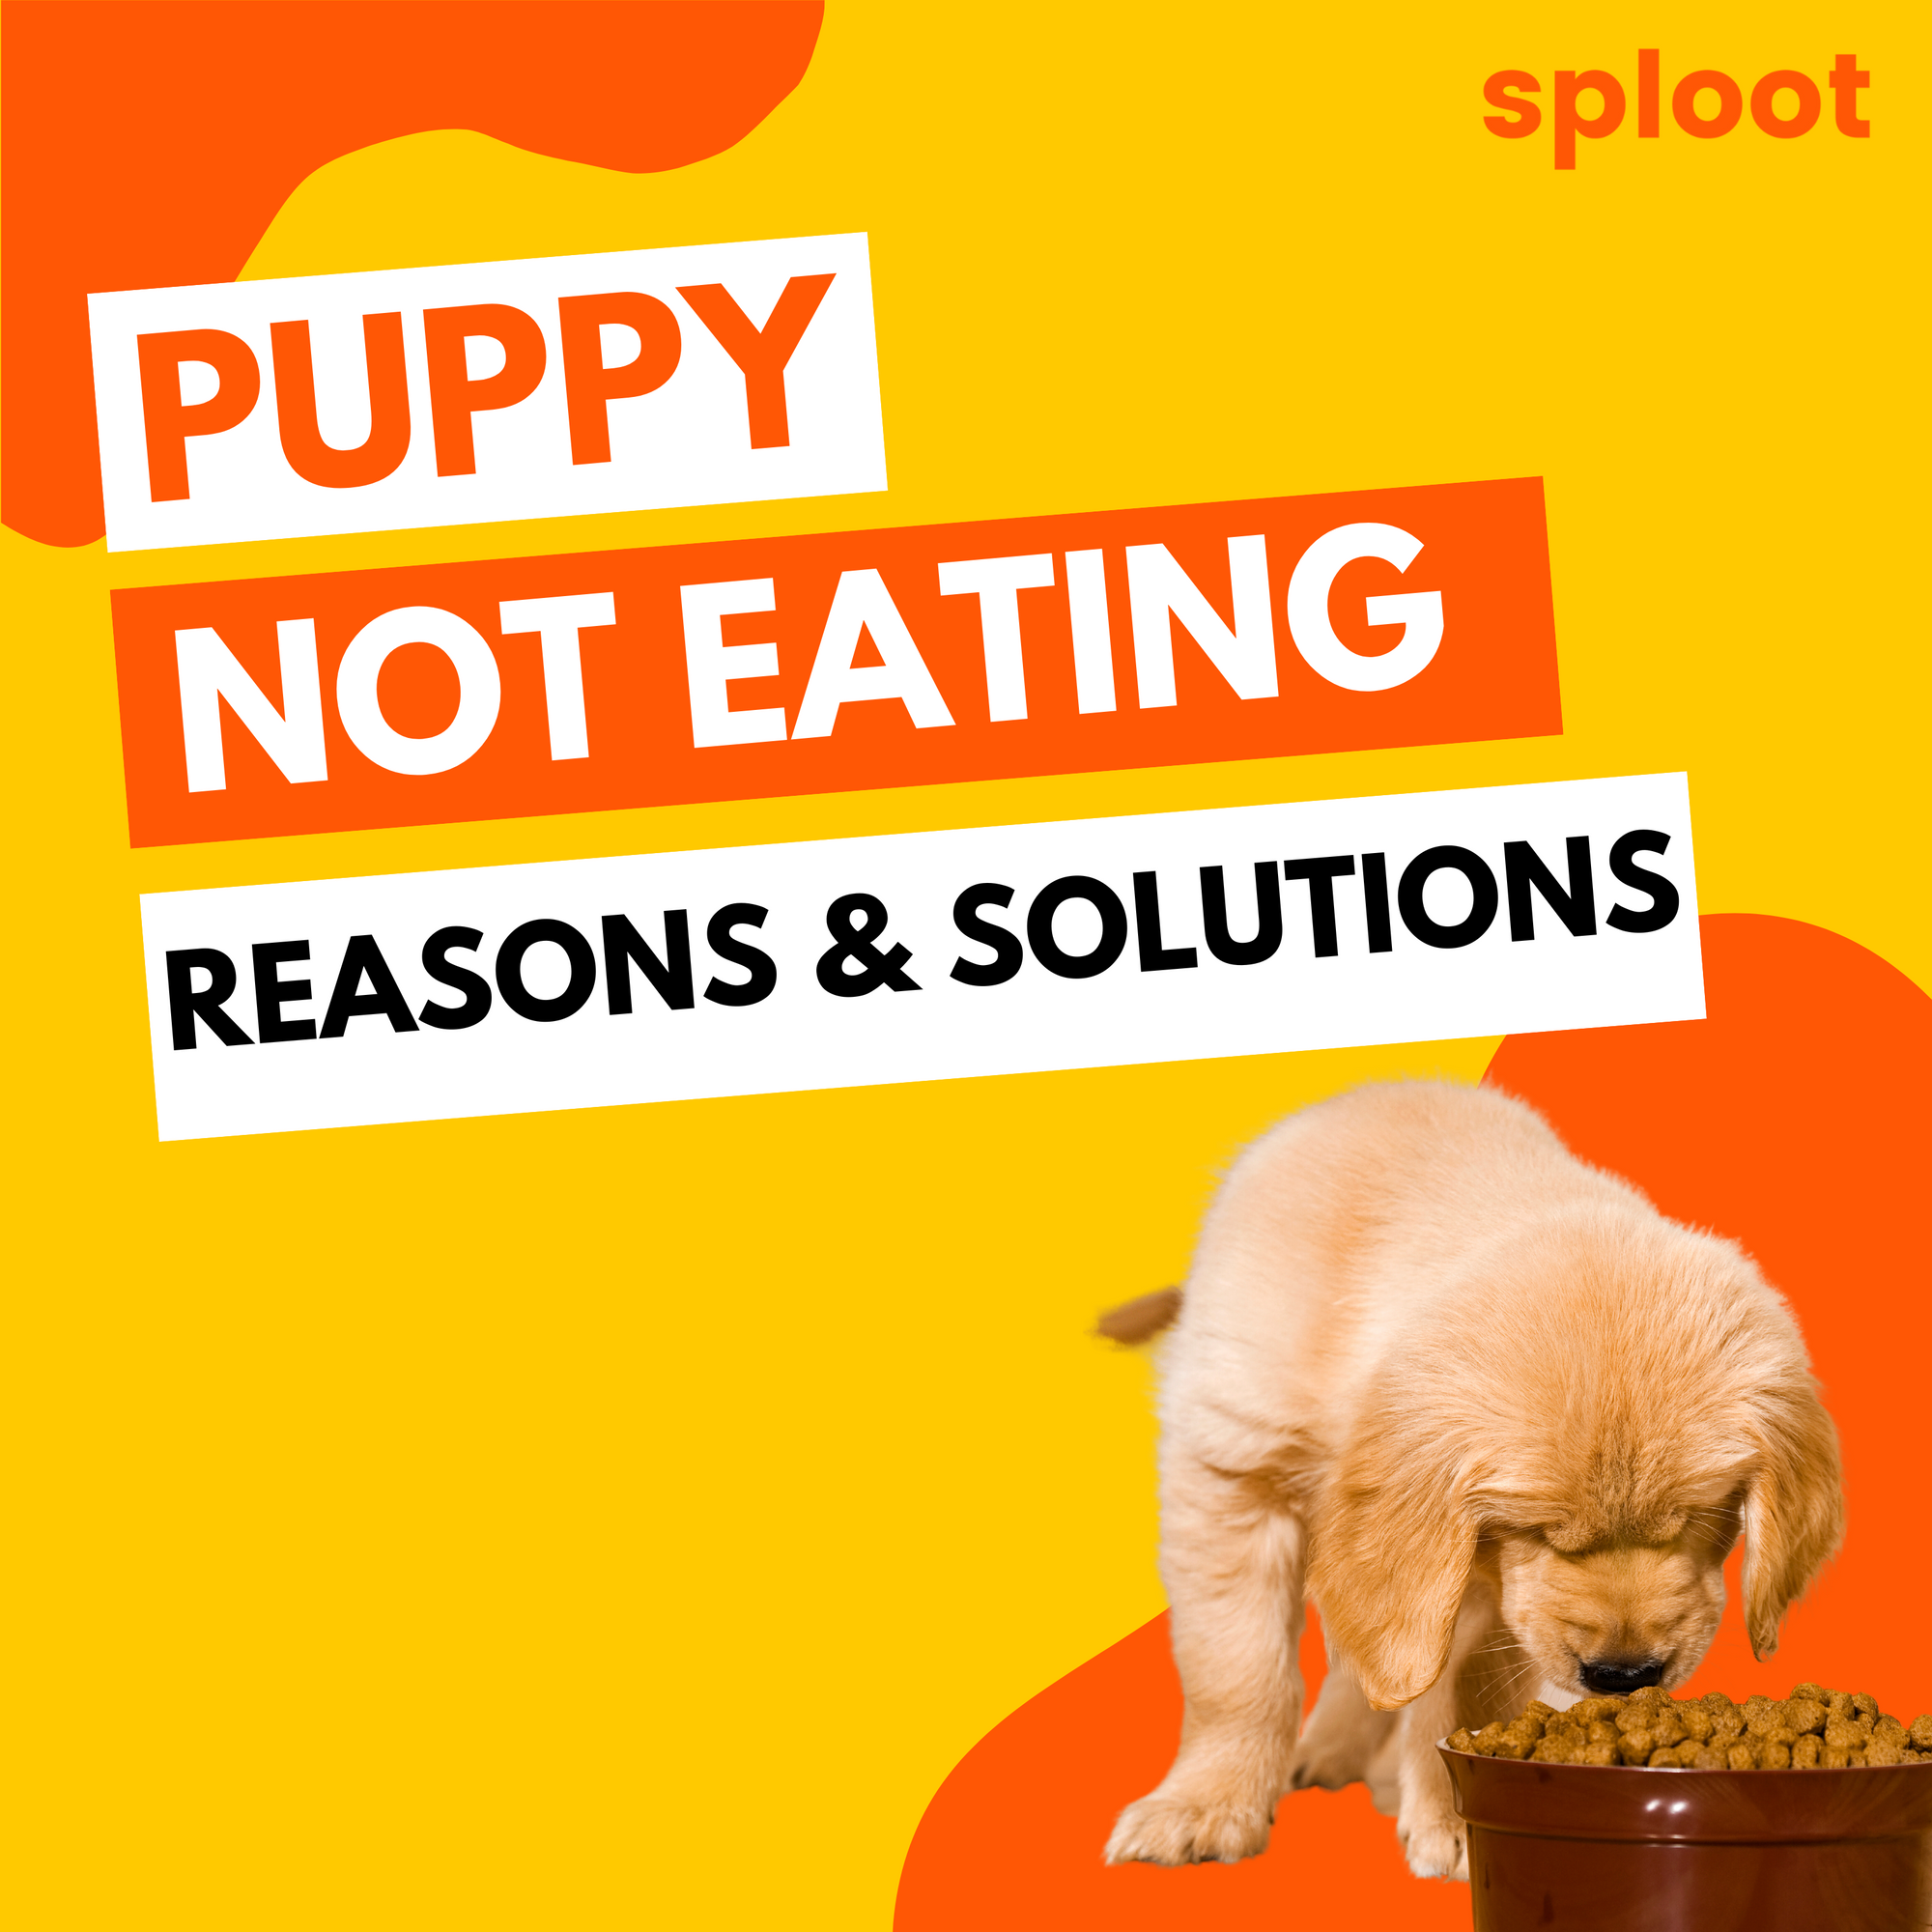 Puppy Not Eating: Reasons & Solutions